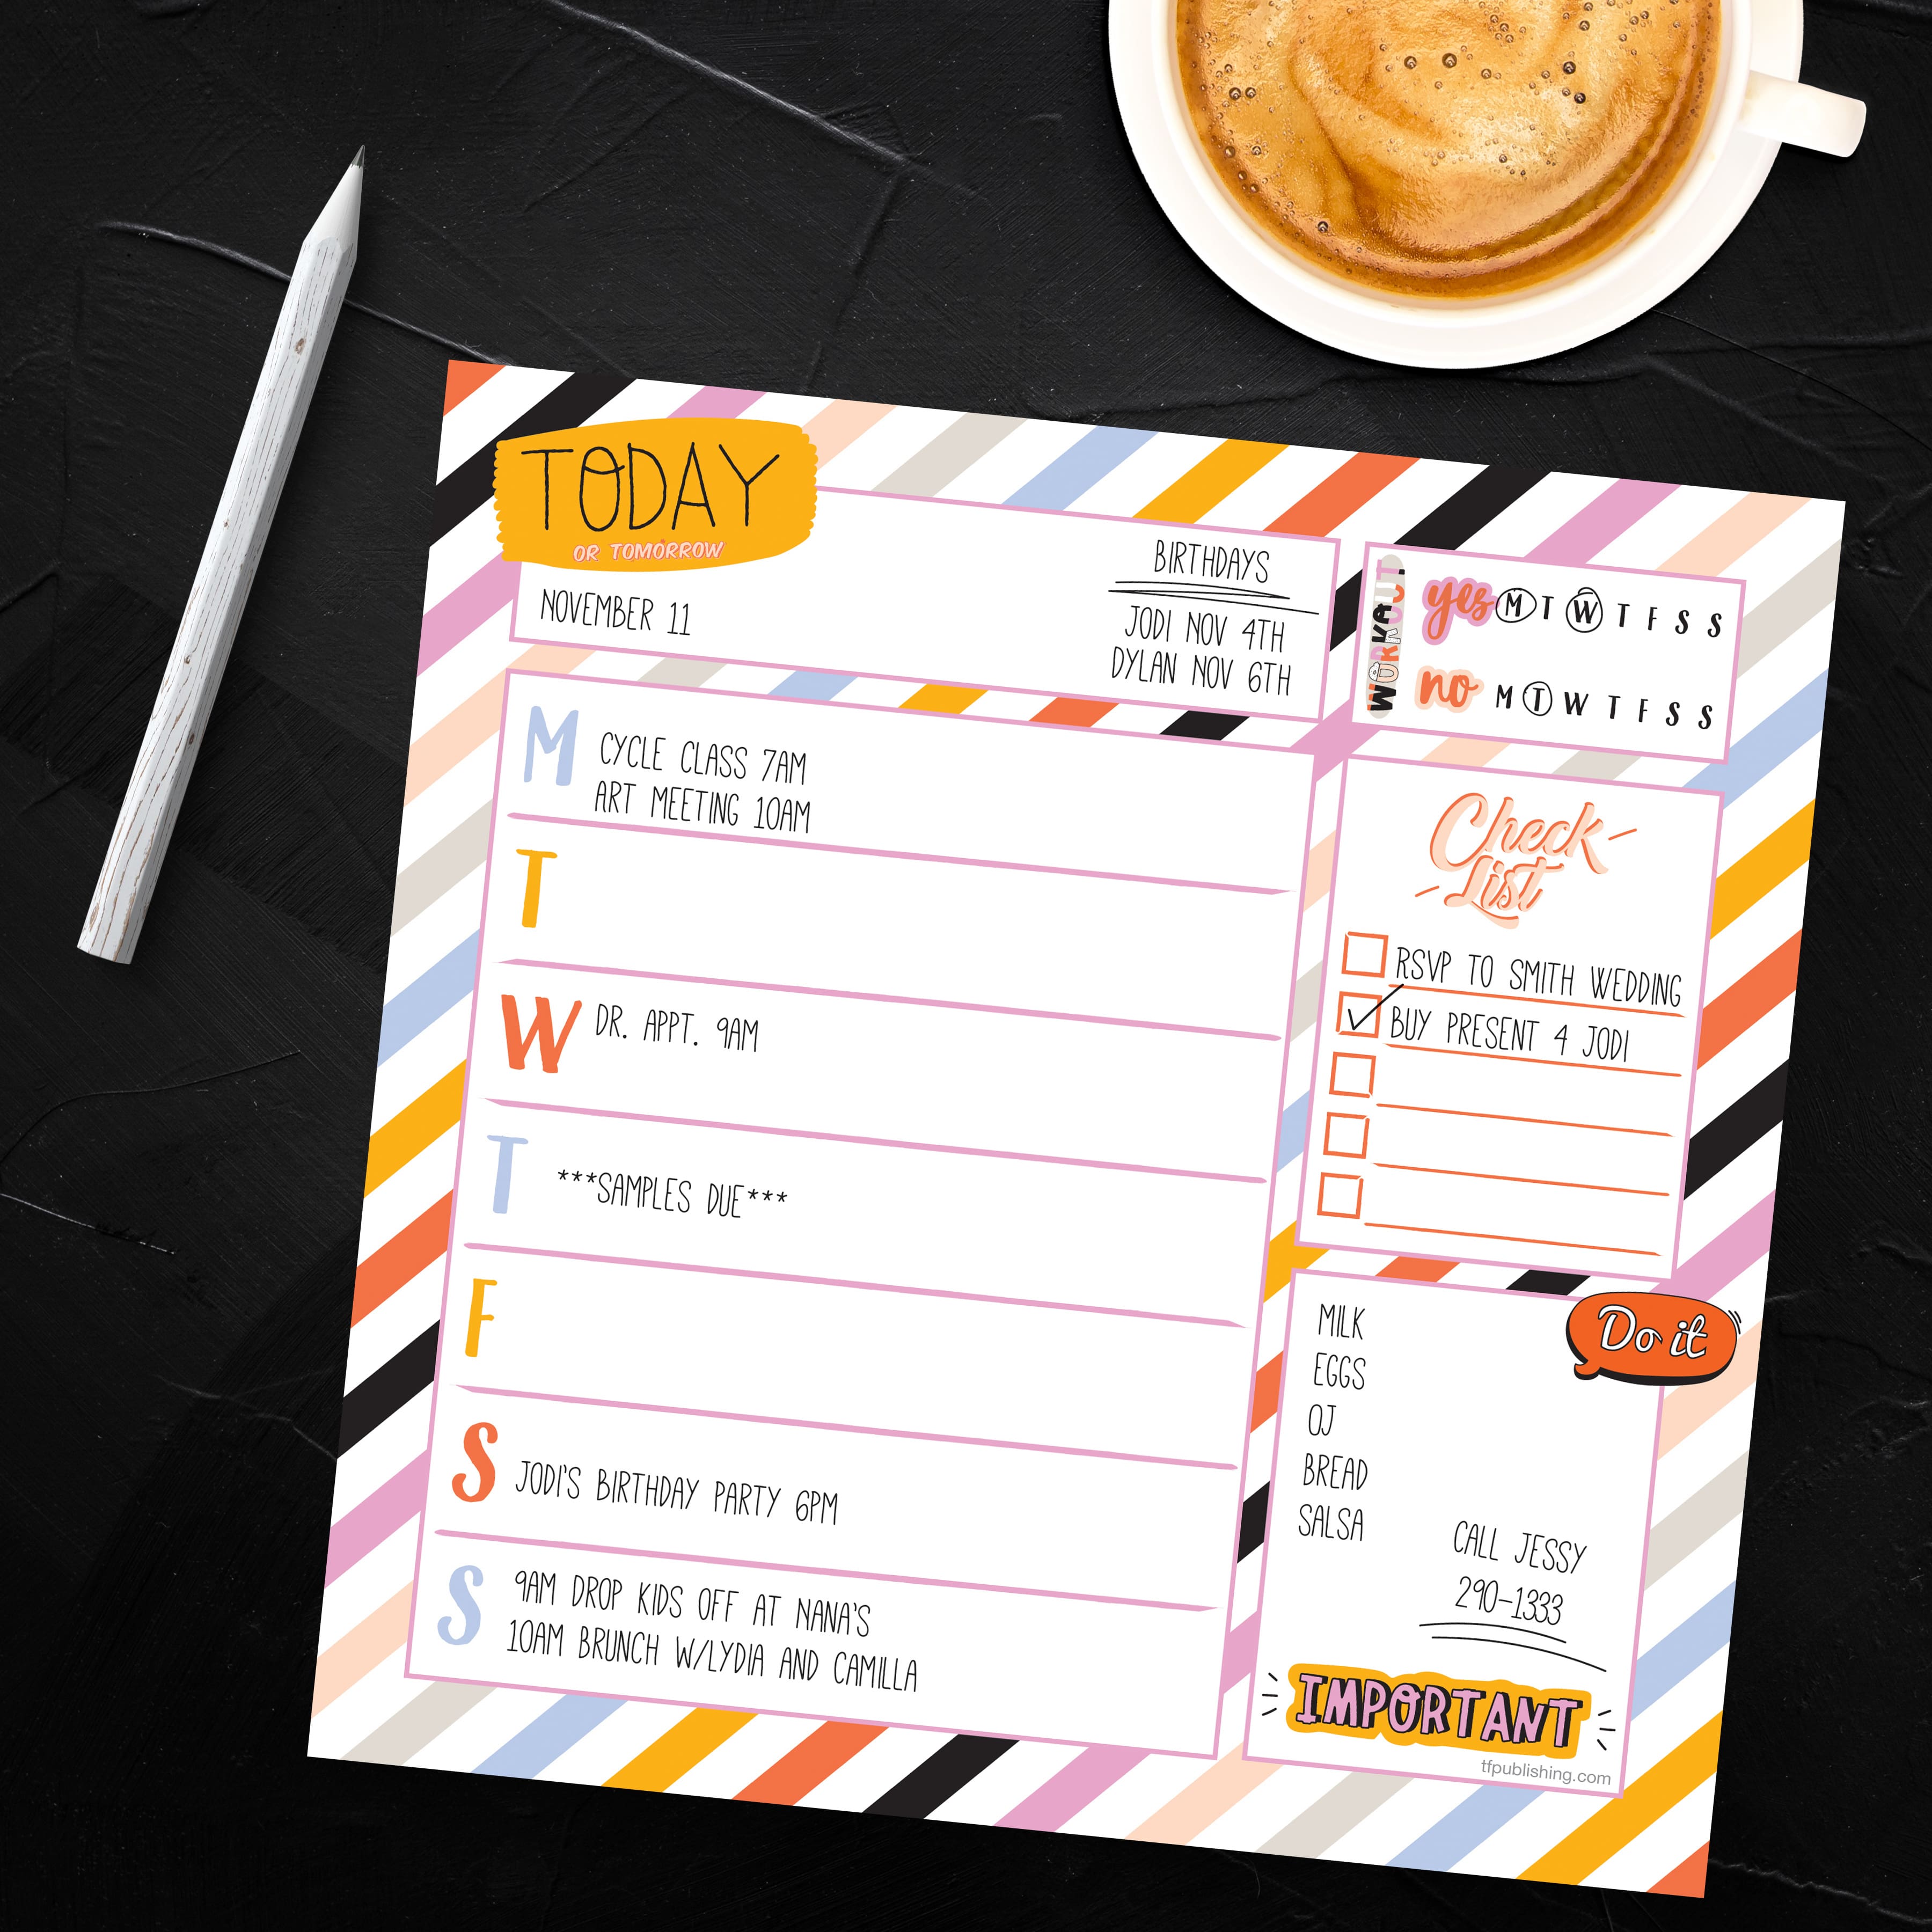 TF Publishing Super Stripe Weekly Square Schedule Pad